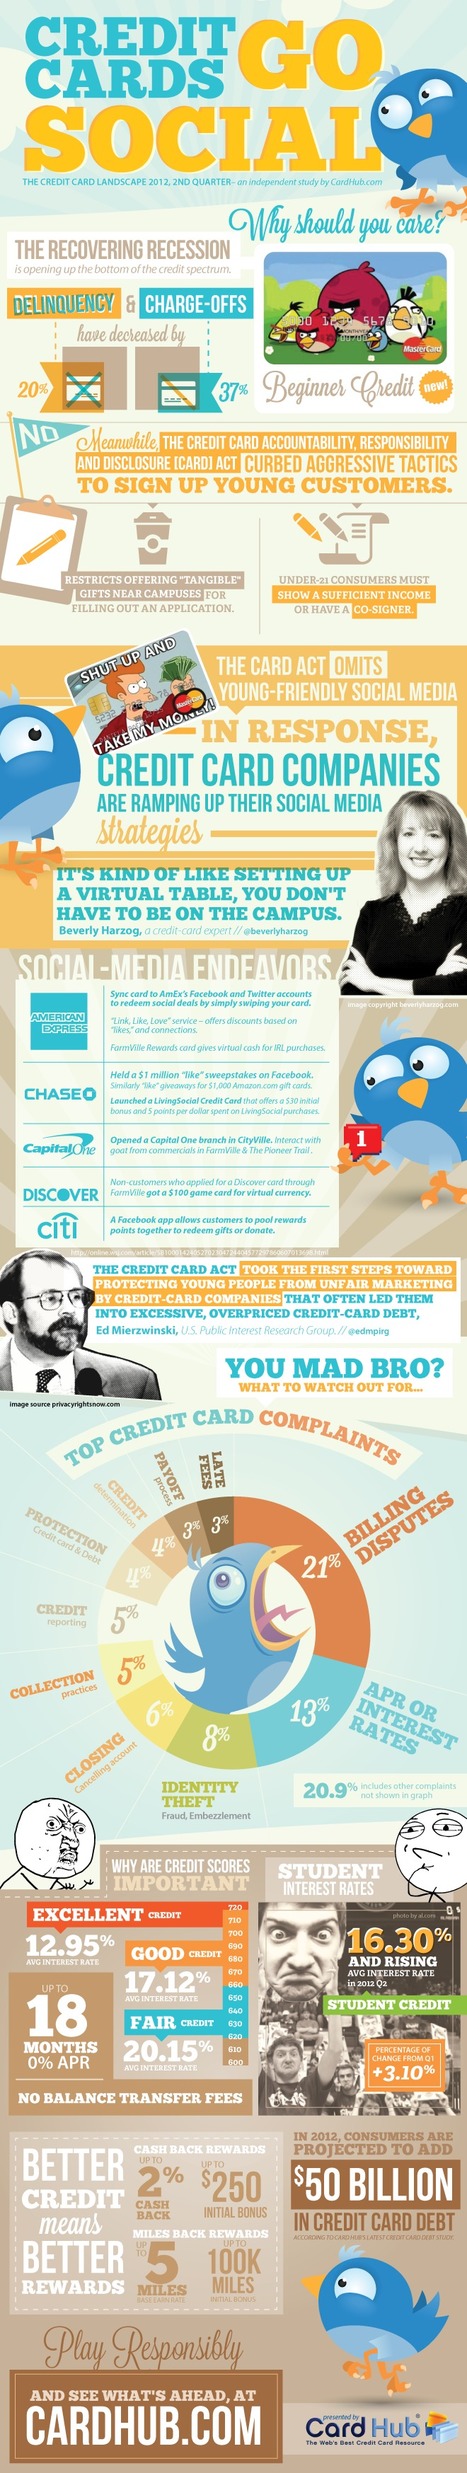 Credit Cards Go Social and Why You Should Care [Infographic] | Better know and better use Social Media today (facebook, twitter...) | Scoop.it